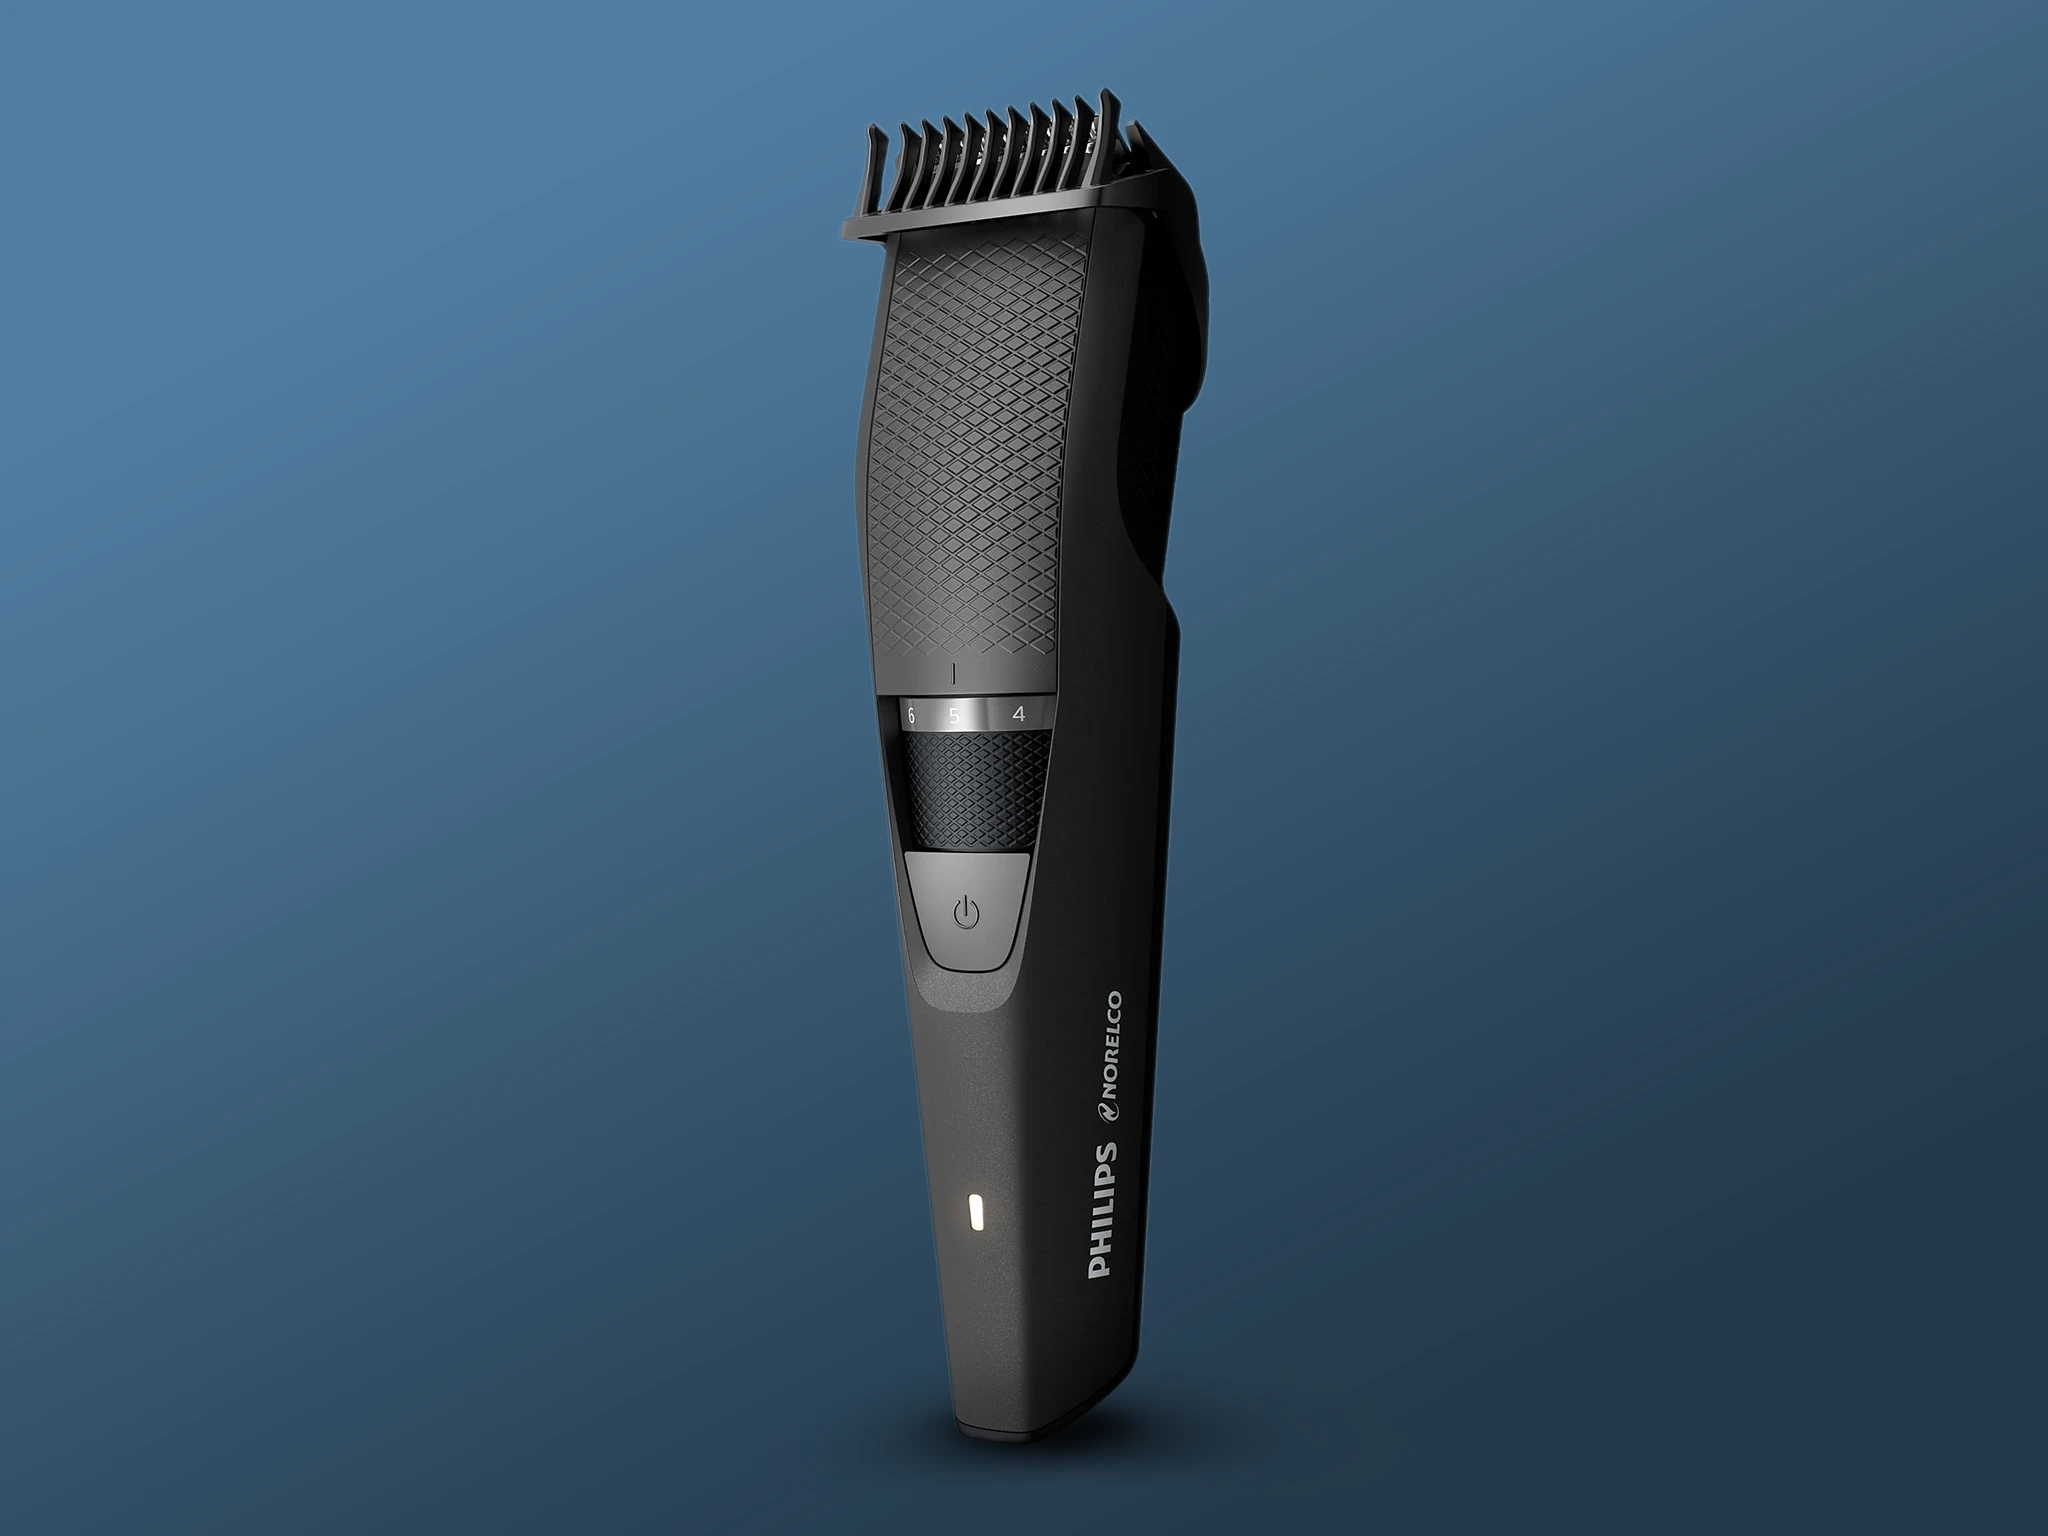 Beard and Stubble Trimmer That Leaves No Hair Behind: Philips Norelco Series 3000